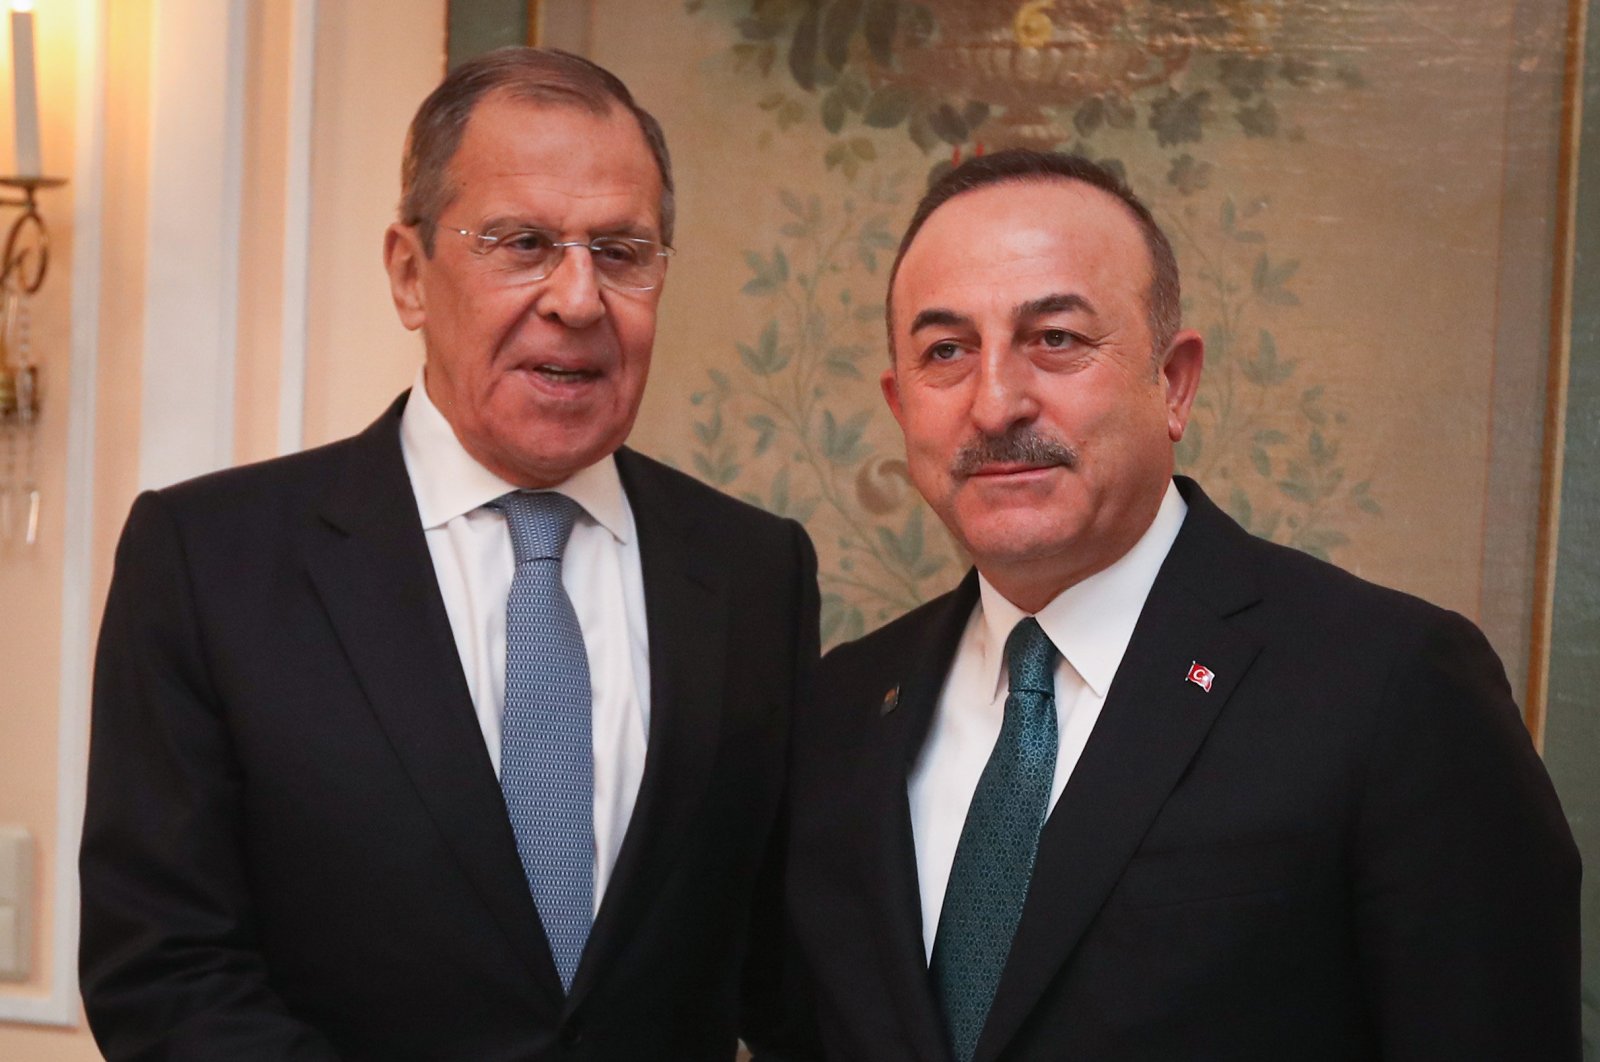 Russian Foreign Minister Sergey Lavrov (L) shakes hand with his Turkish counterpart, Mevlüt Çavuşoğlu, during the Munich Security Conference, Munich, Feb.17, 2020.